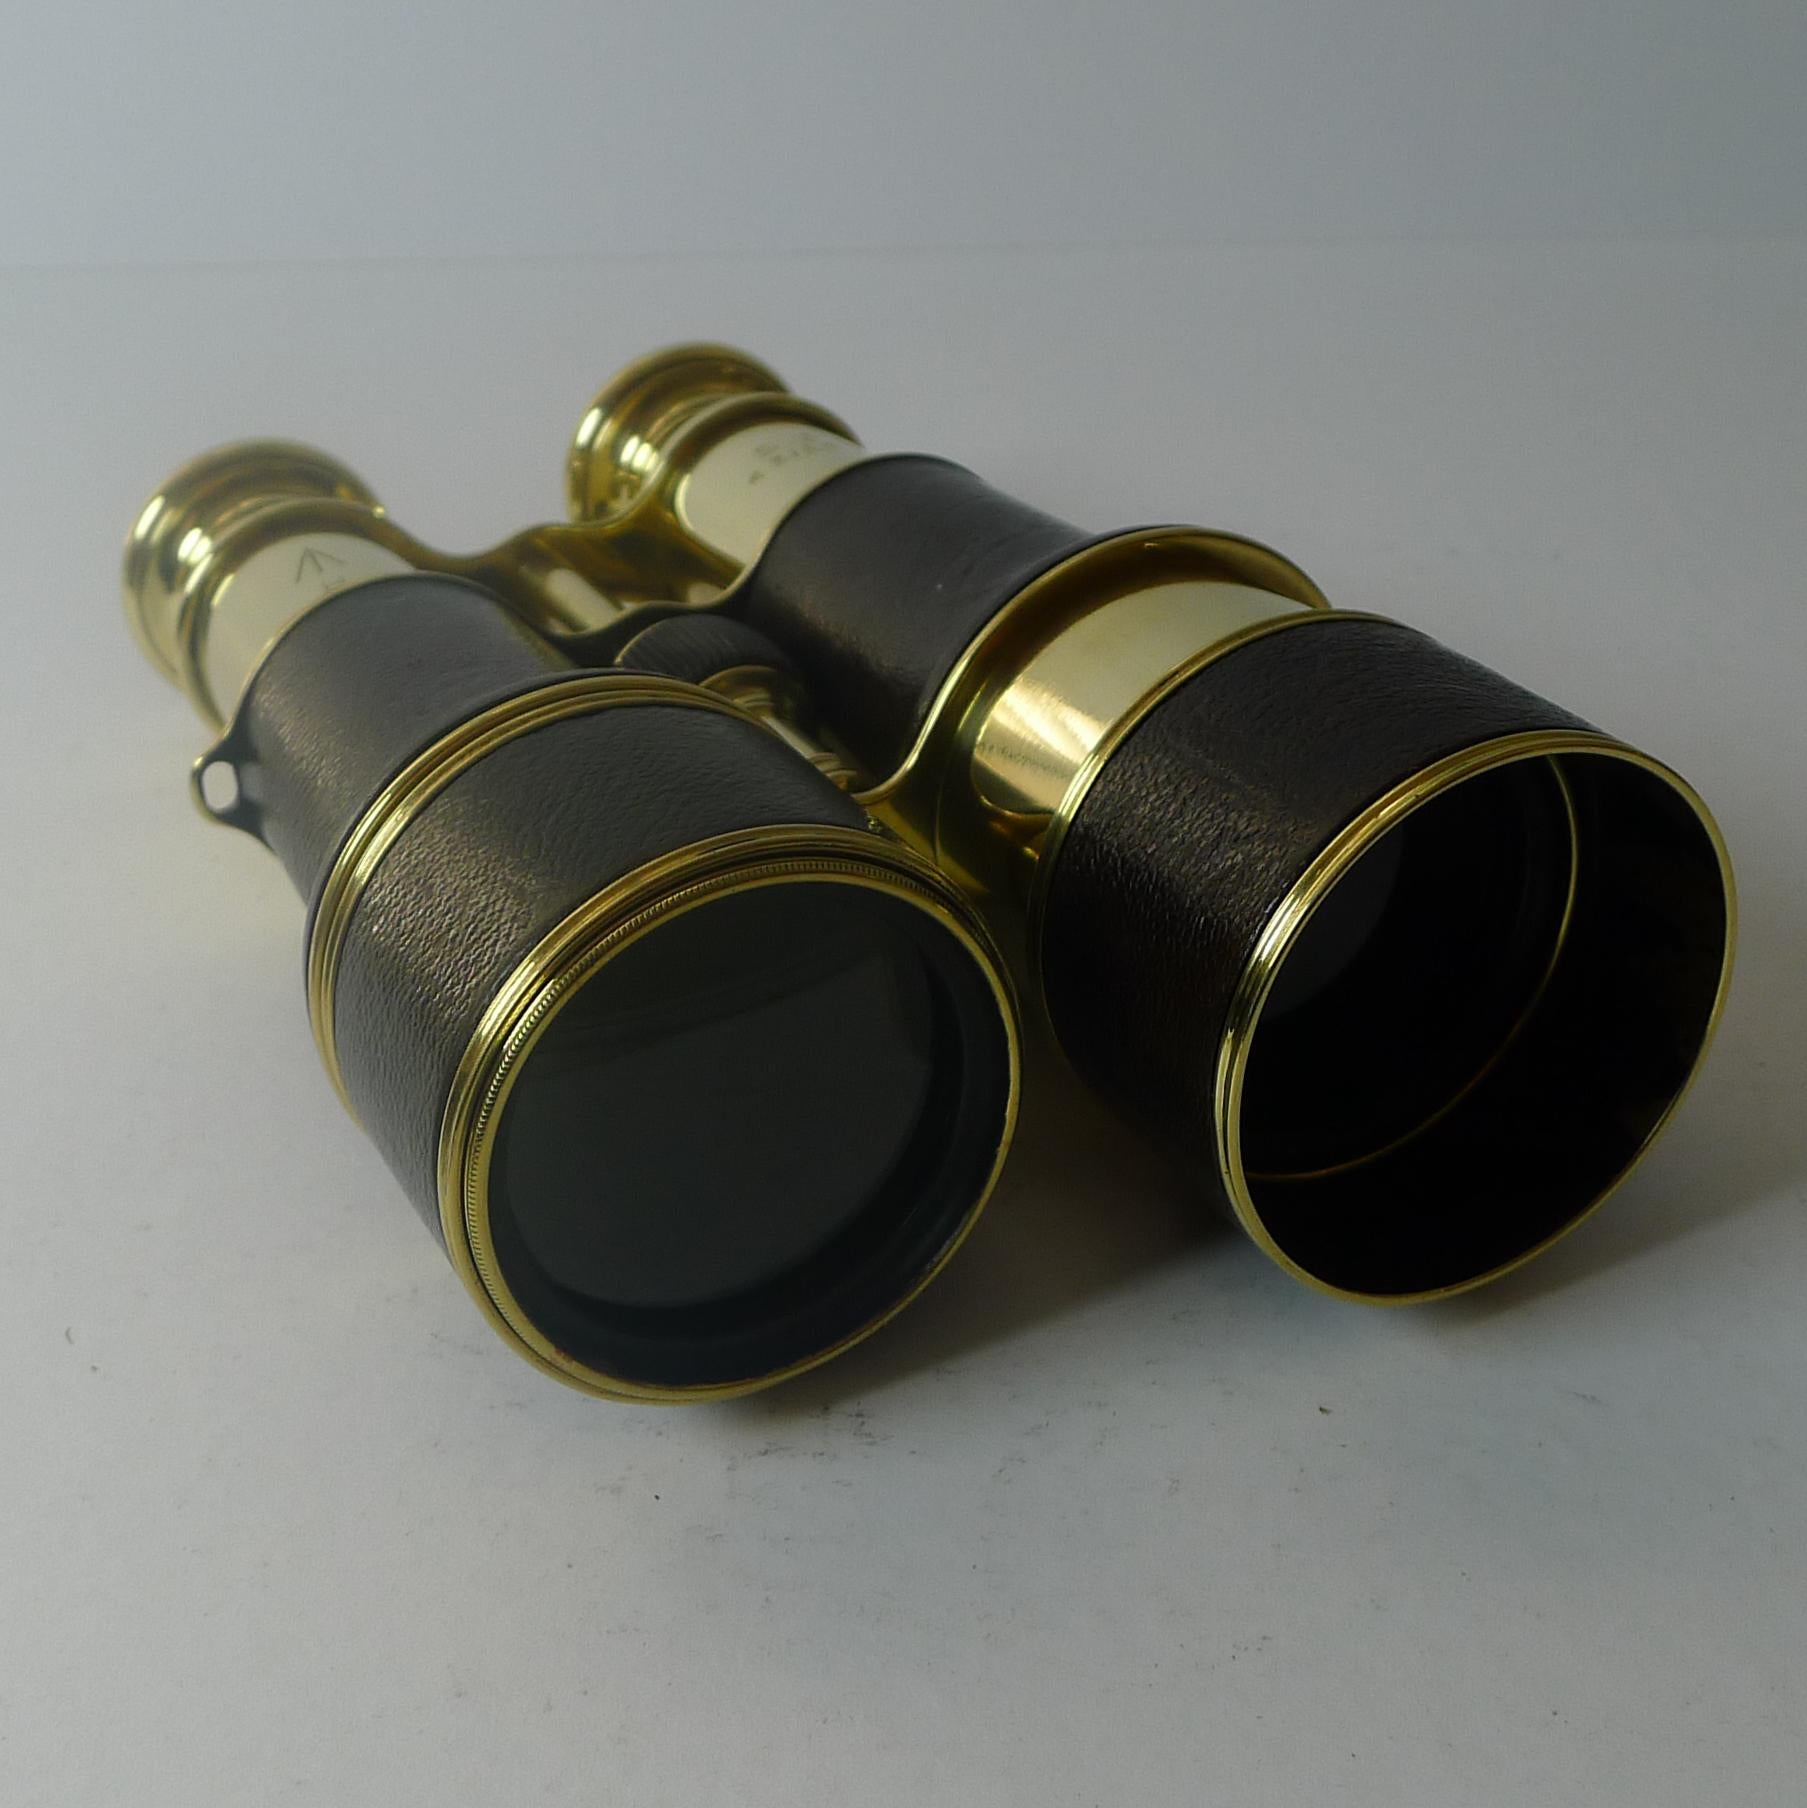 French Pair WW1 Binoculars - British Officer's Issue by LeMaire, Paris